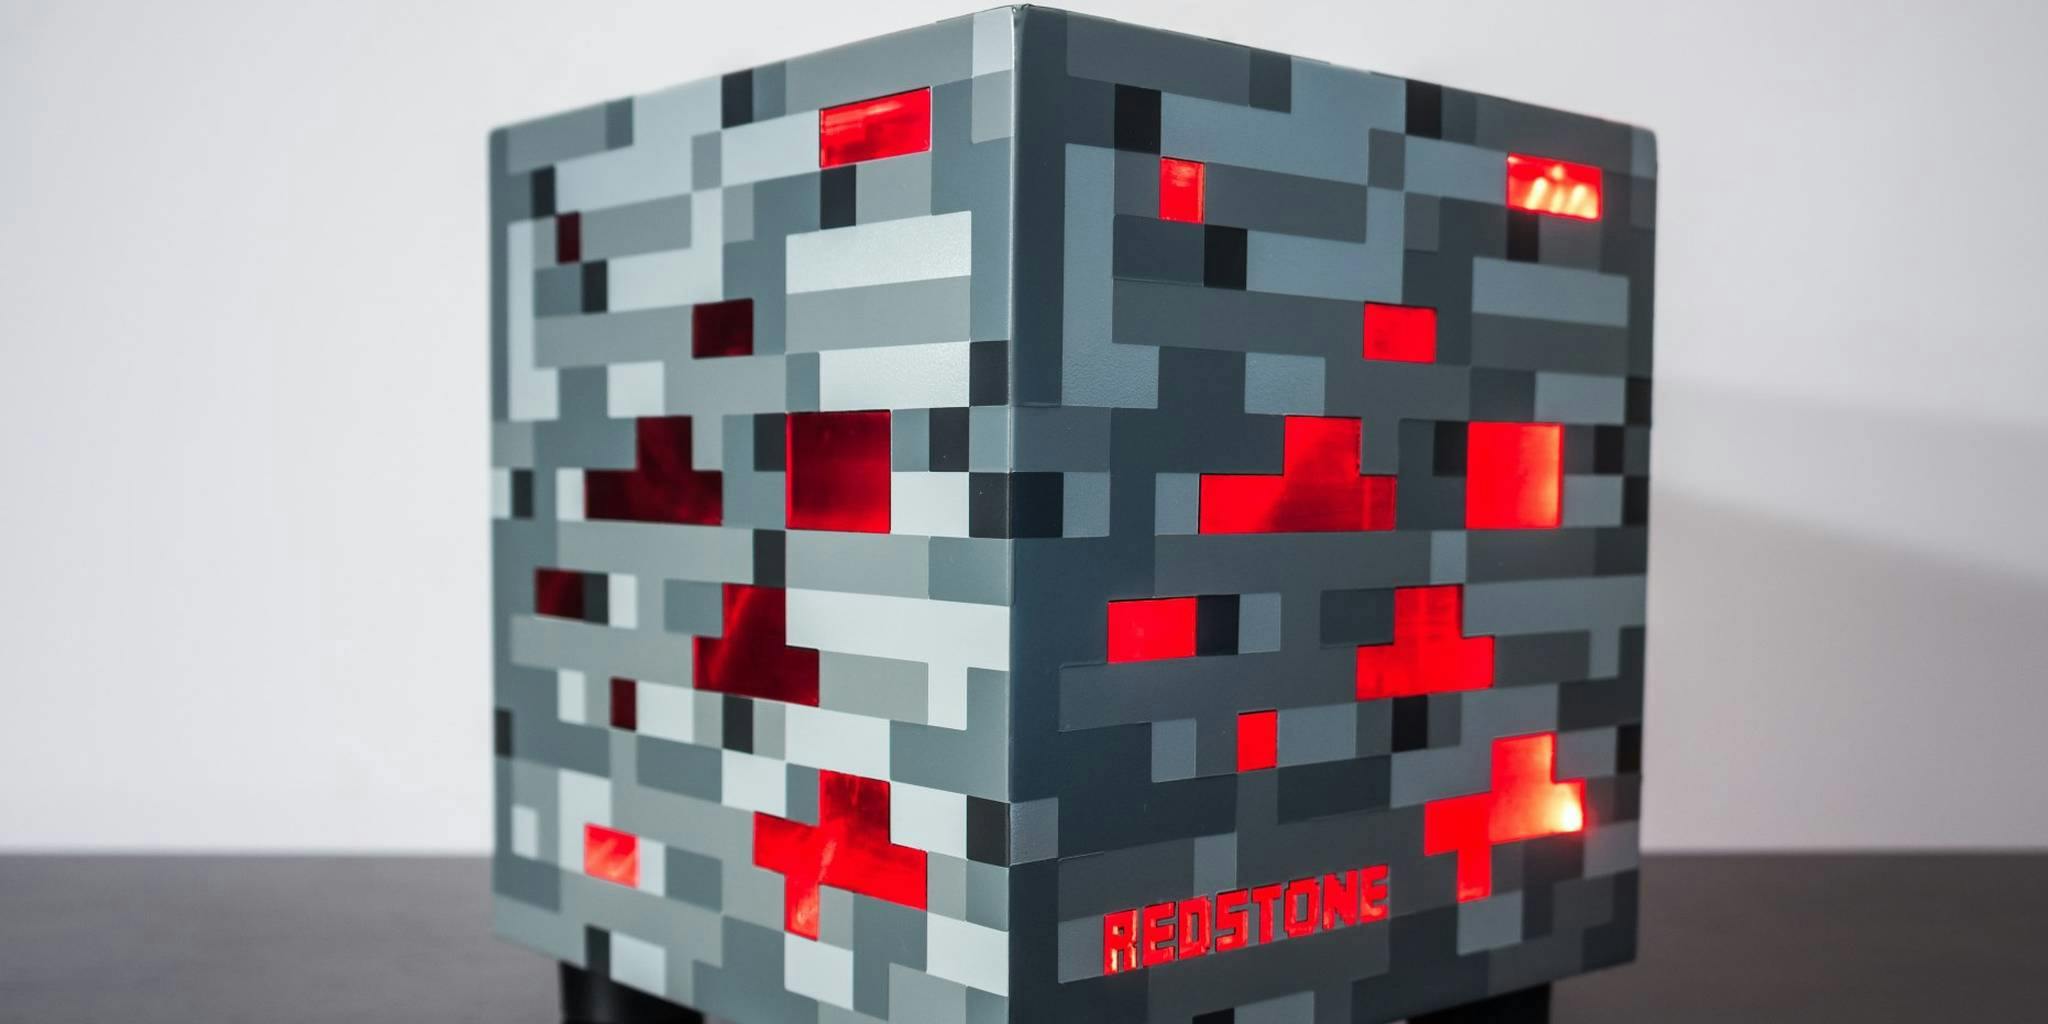 This Custom Pc Is An Actual Minecraft Redstone Block The Daily Dot